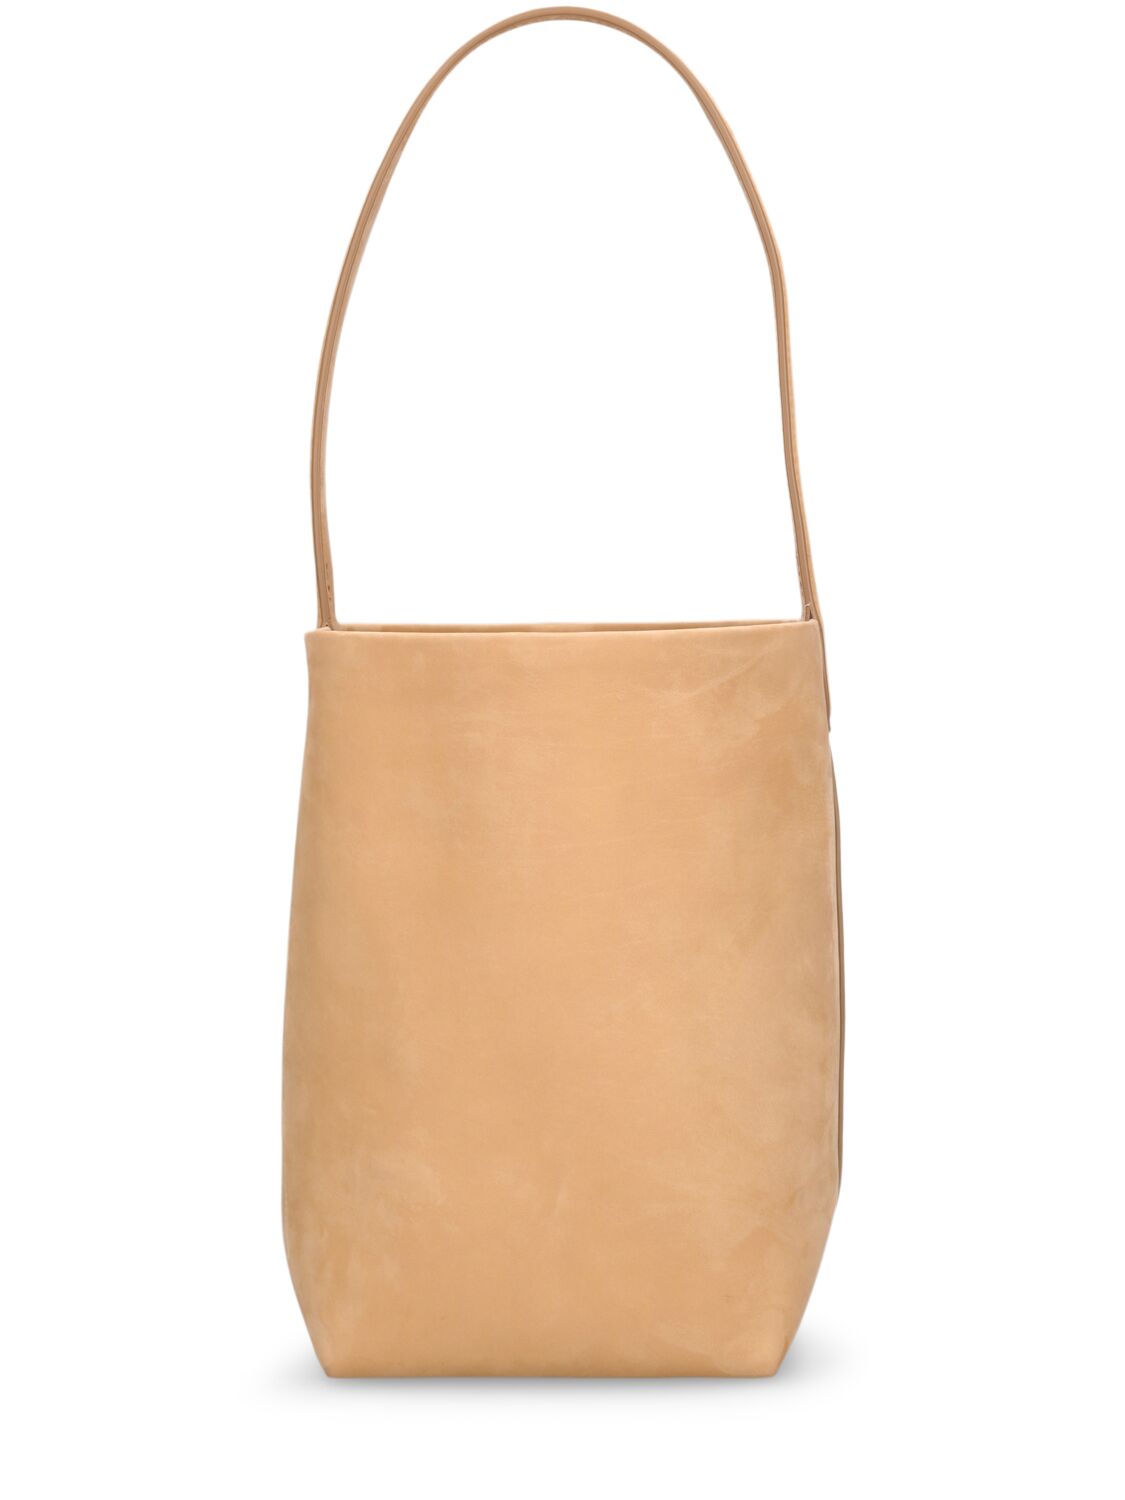 Shop The Row Small N/s Park Leather Tote Bag In Croissant